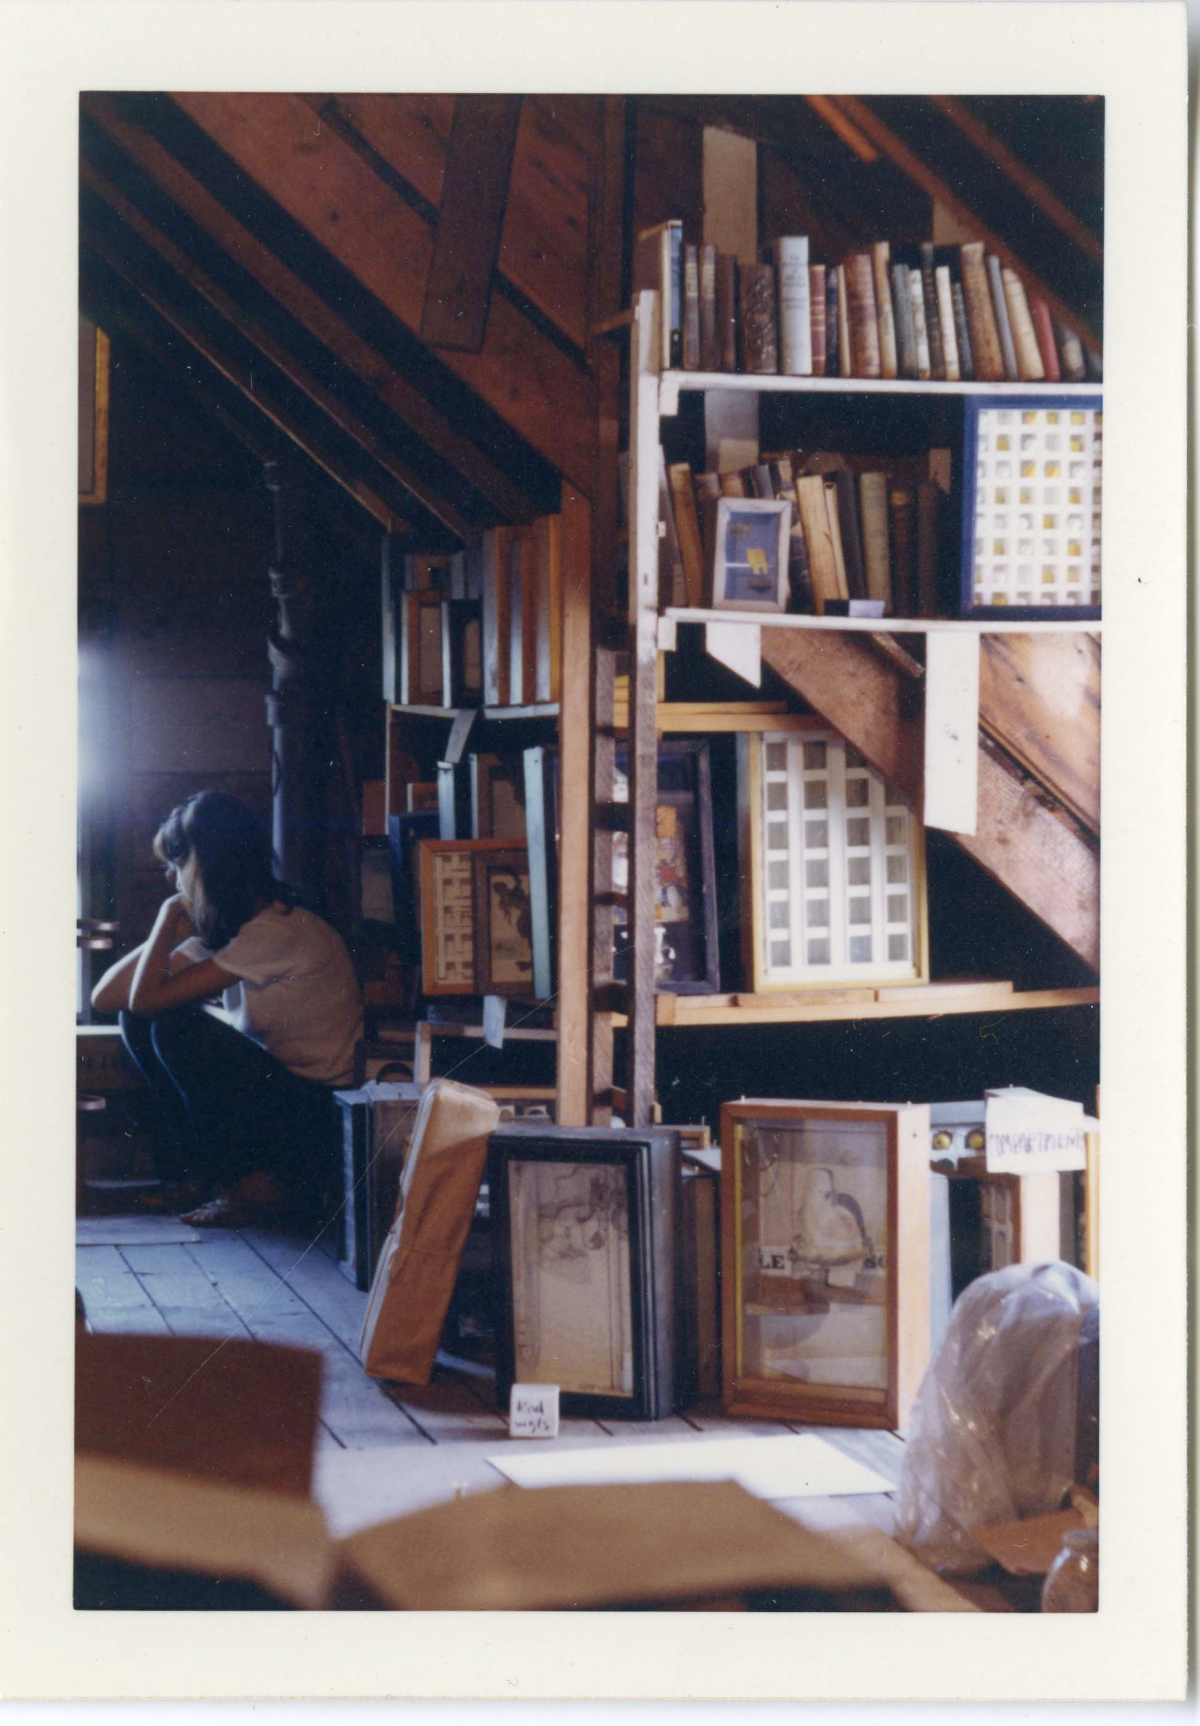 A view of an attic with filled shelves, boxes and artworks on the floor, an unidentified person sitting in the background